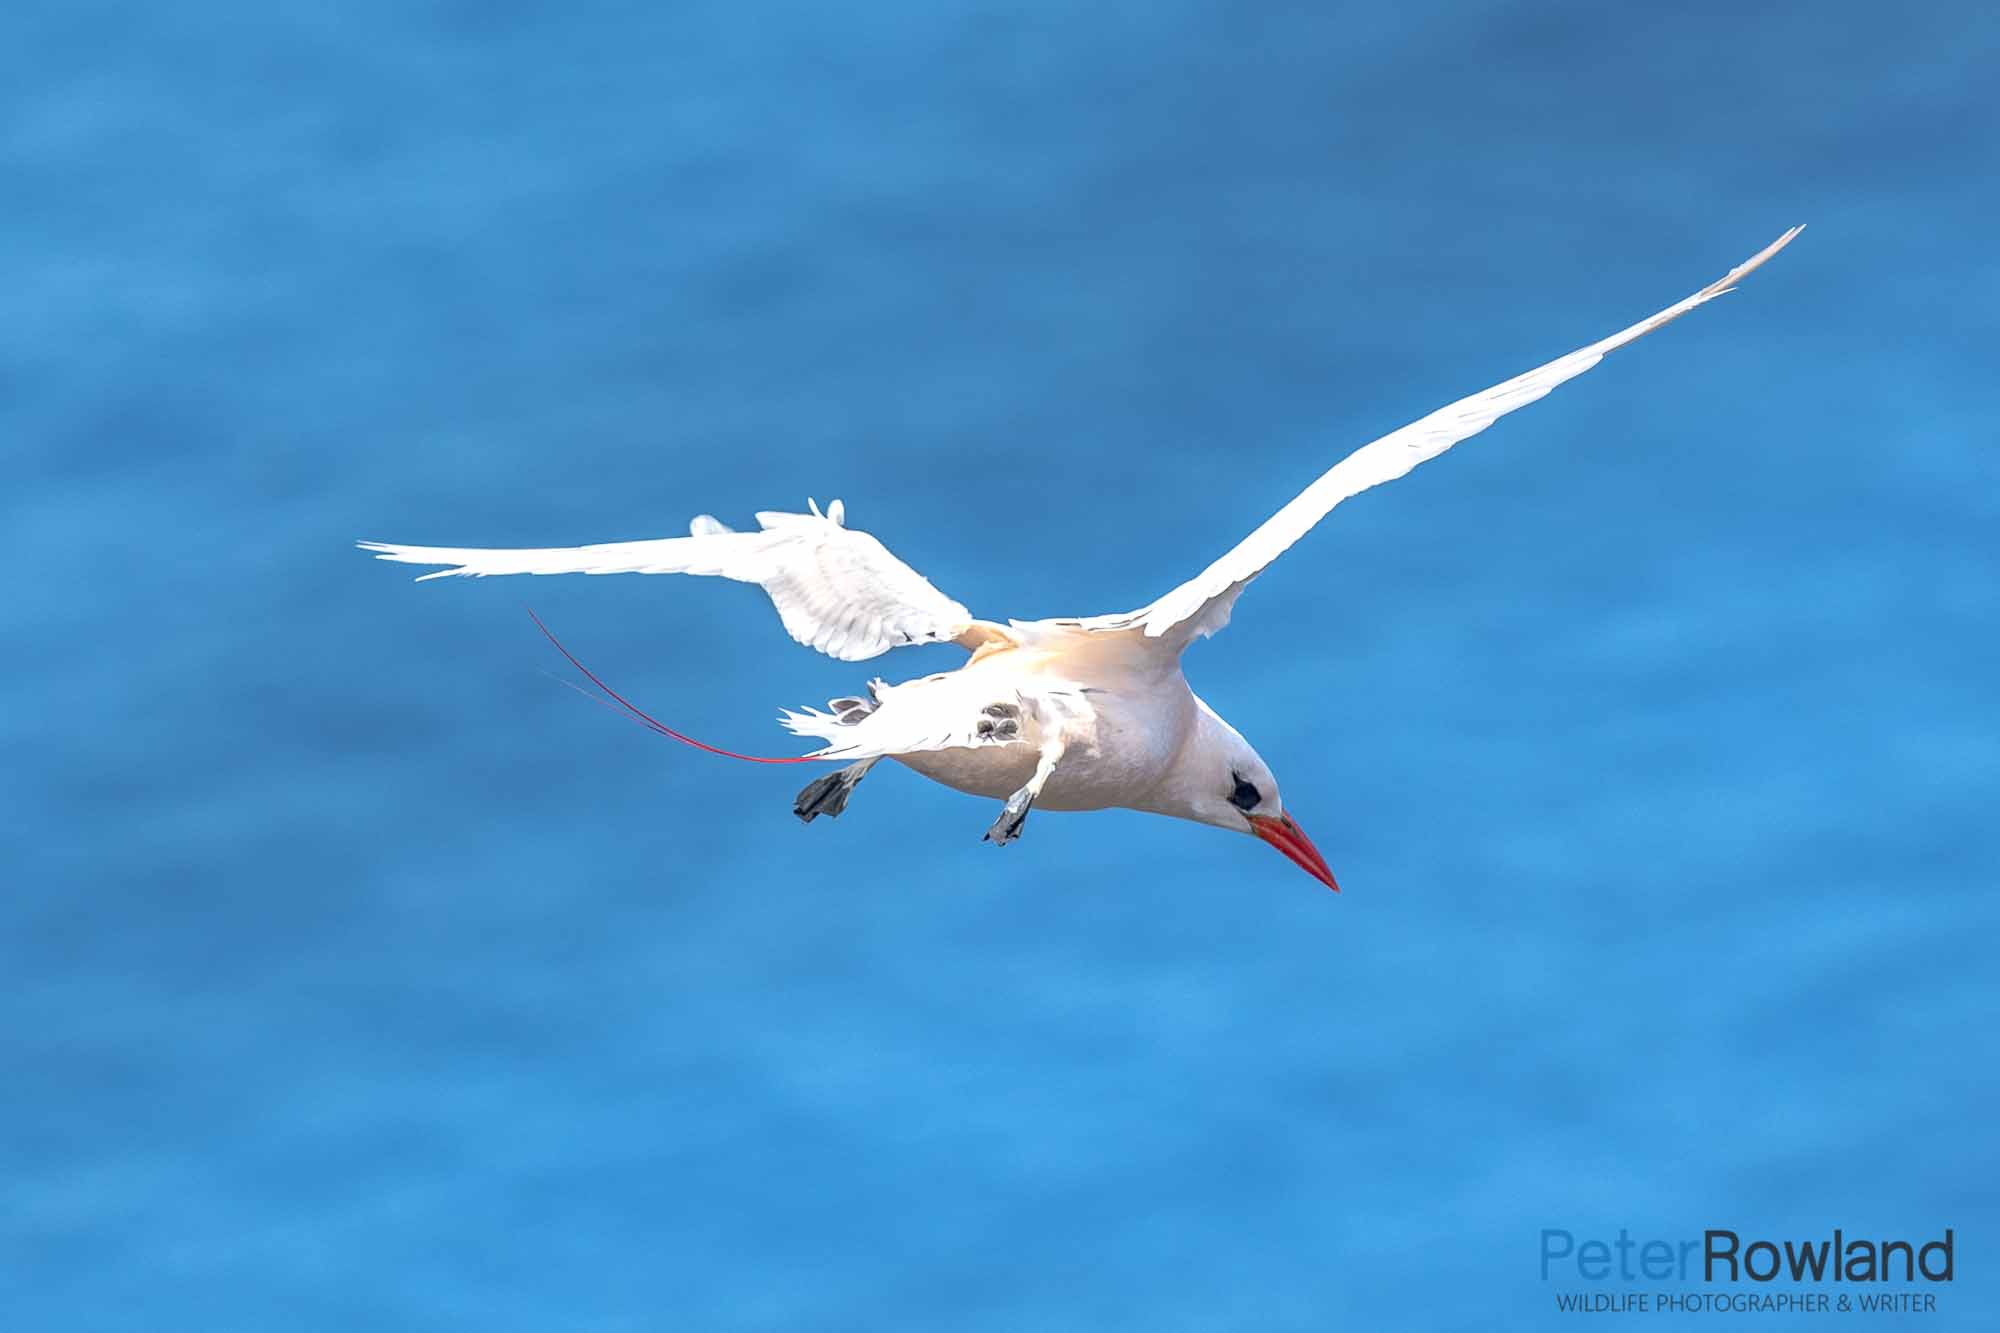 A Red-tailed Tropicbird flying over the ocean in search of food. [Photographed by Thomas Rowland]